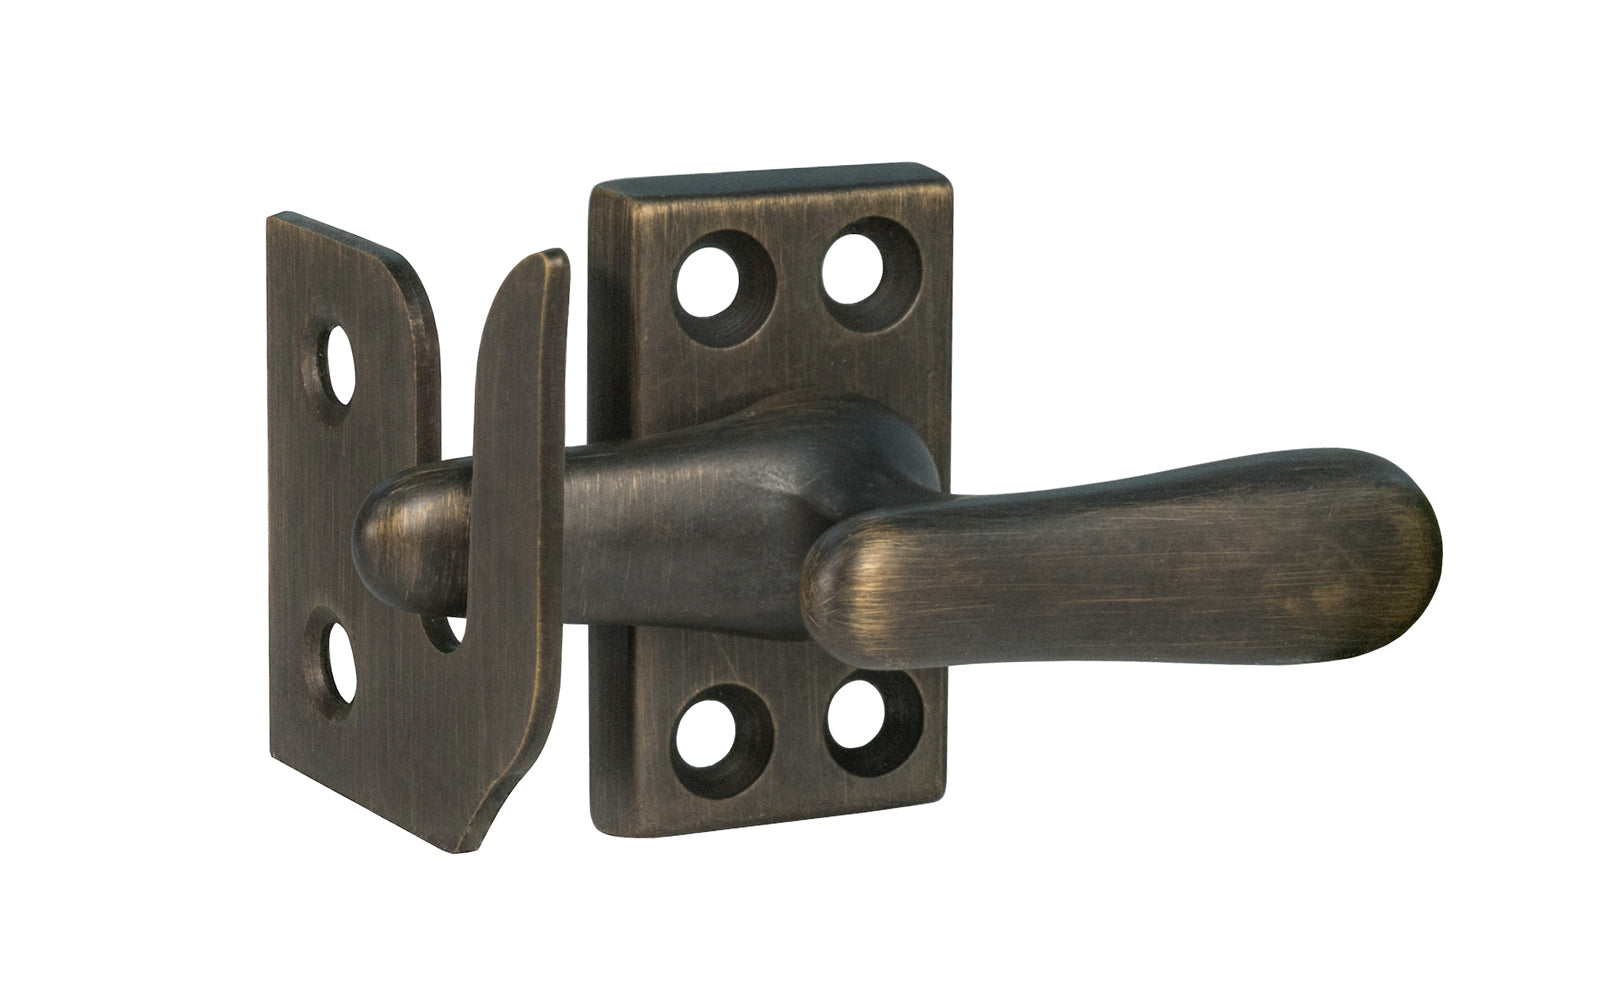 Classic & Traditional Solid Brass Casement Window Latch ~ Regular Size. 1-9/16" high x 7/8" wide latch turn base. Locks & tightens window frames or small doors. Reversible for right or left applications. Vintage-style casement window lock. Dark Antique Brass Finish.